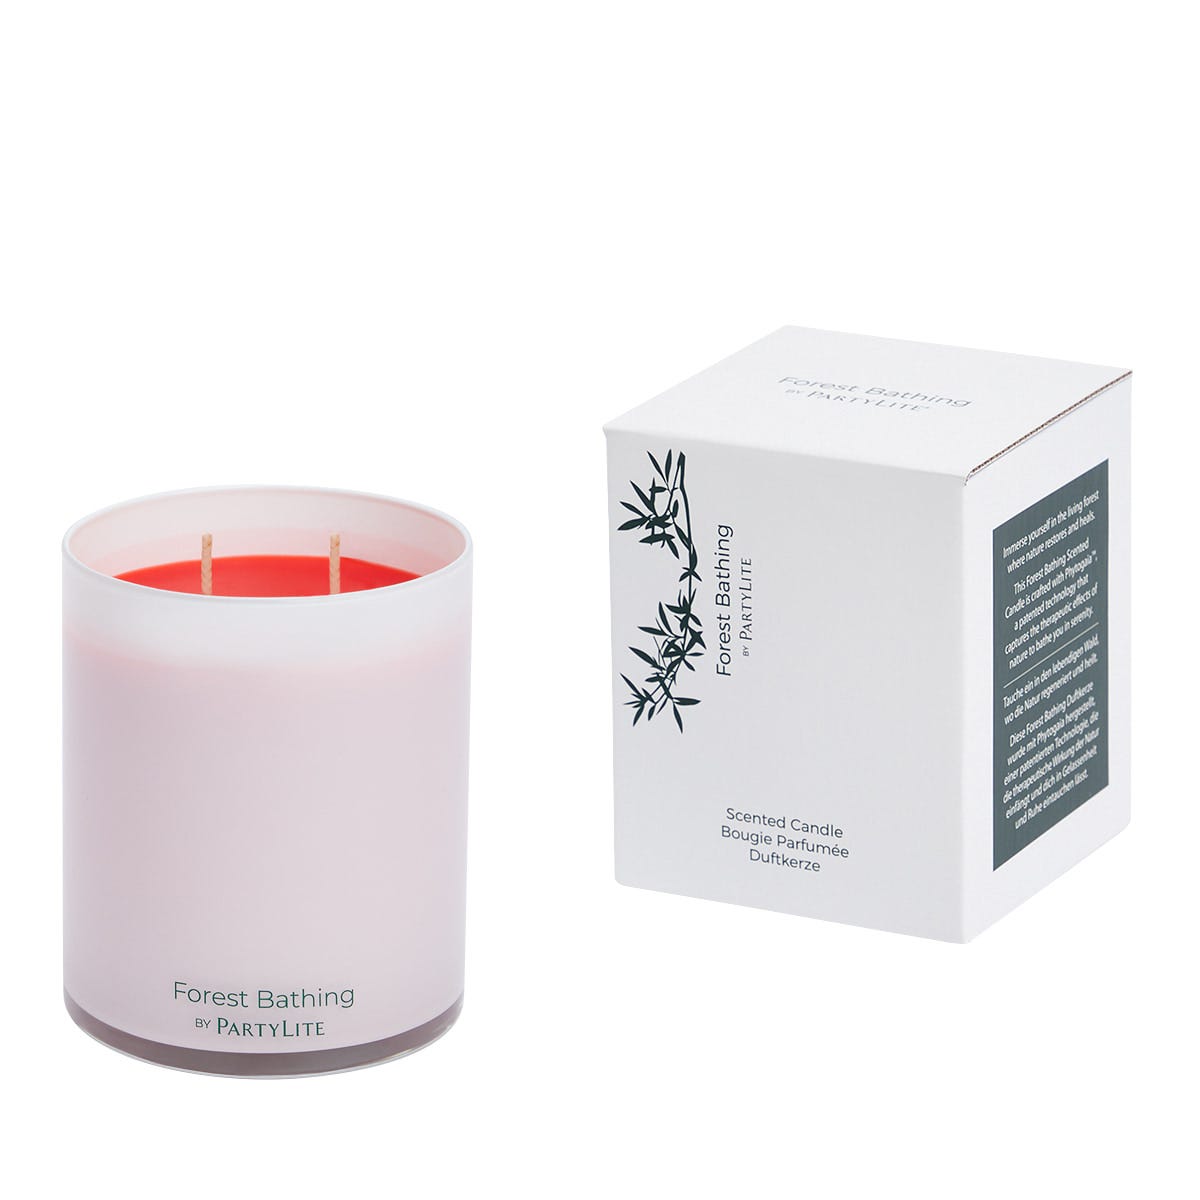 Forest Bathing Wild Woodland Berries 2-Wick Jar Candle